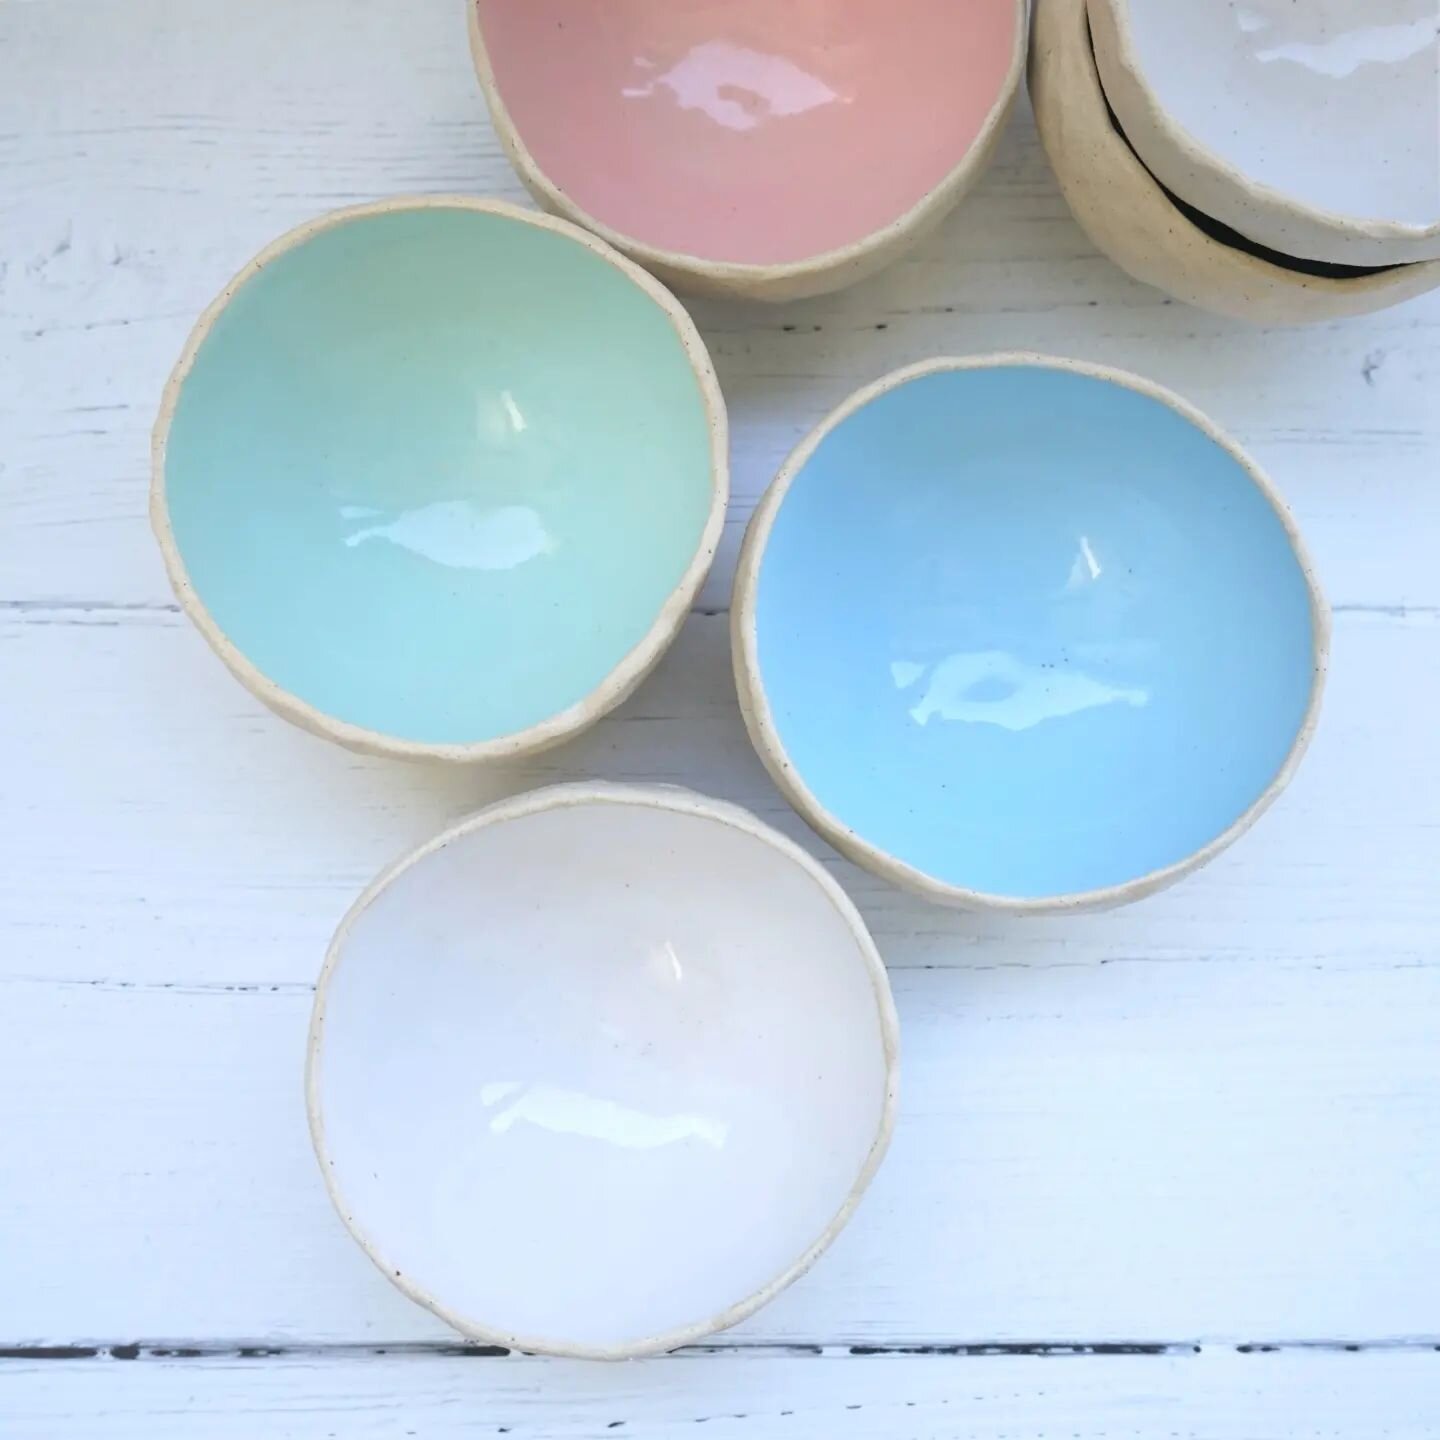 Pretty pastel bowls to cheer up a bleak and rainy day...